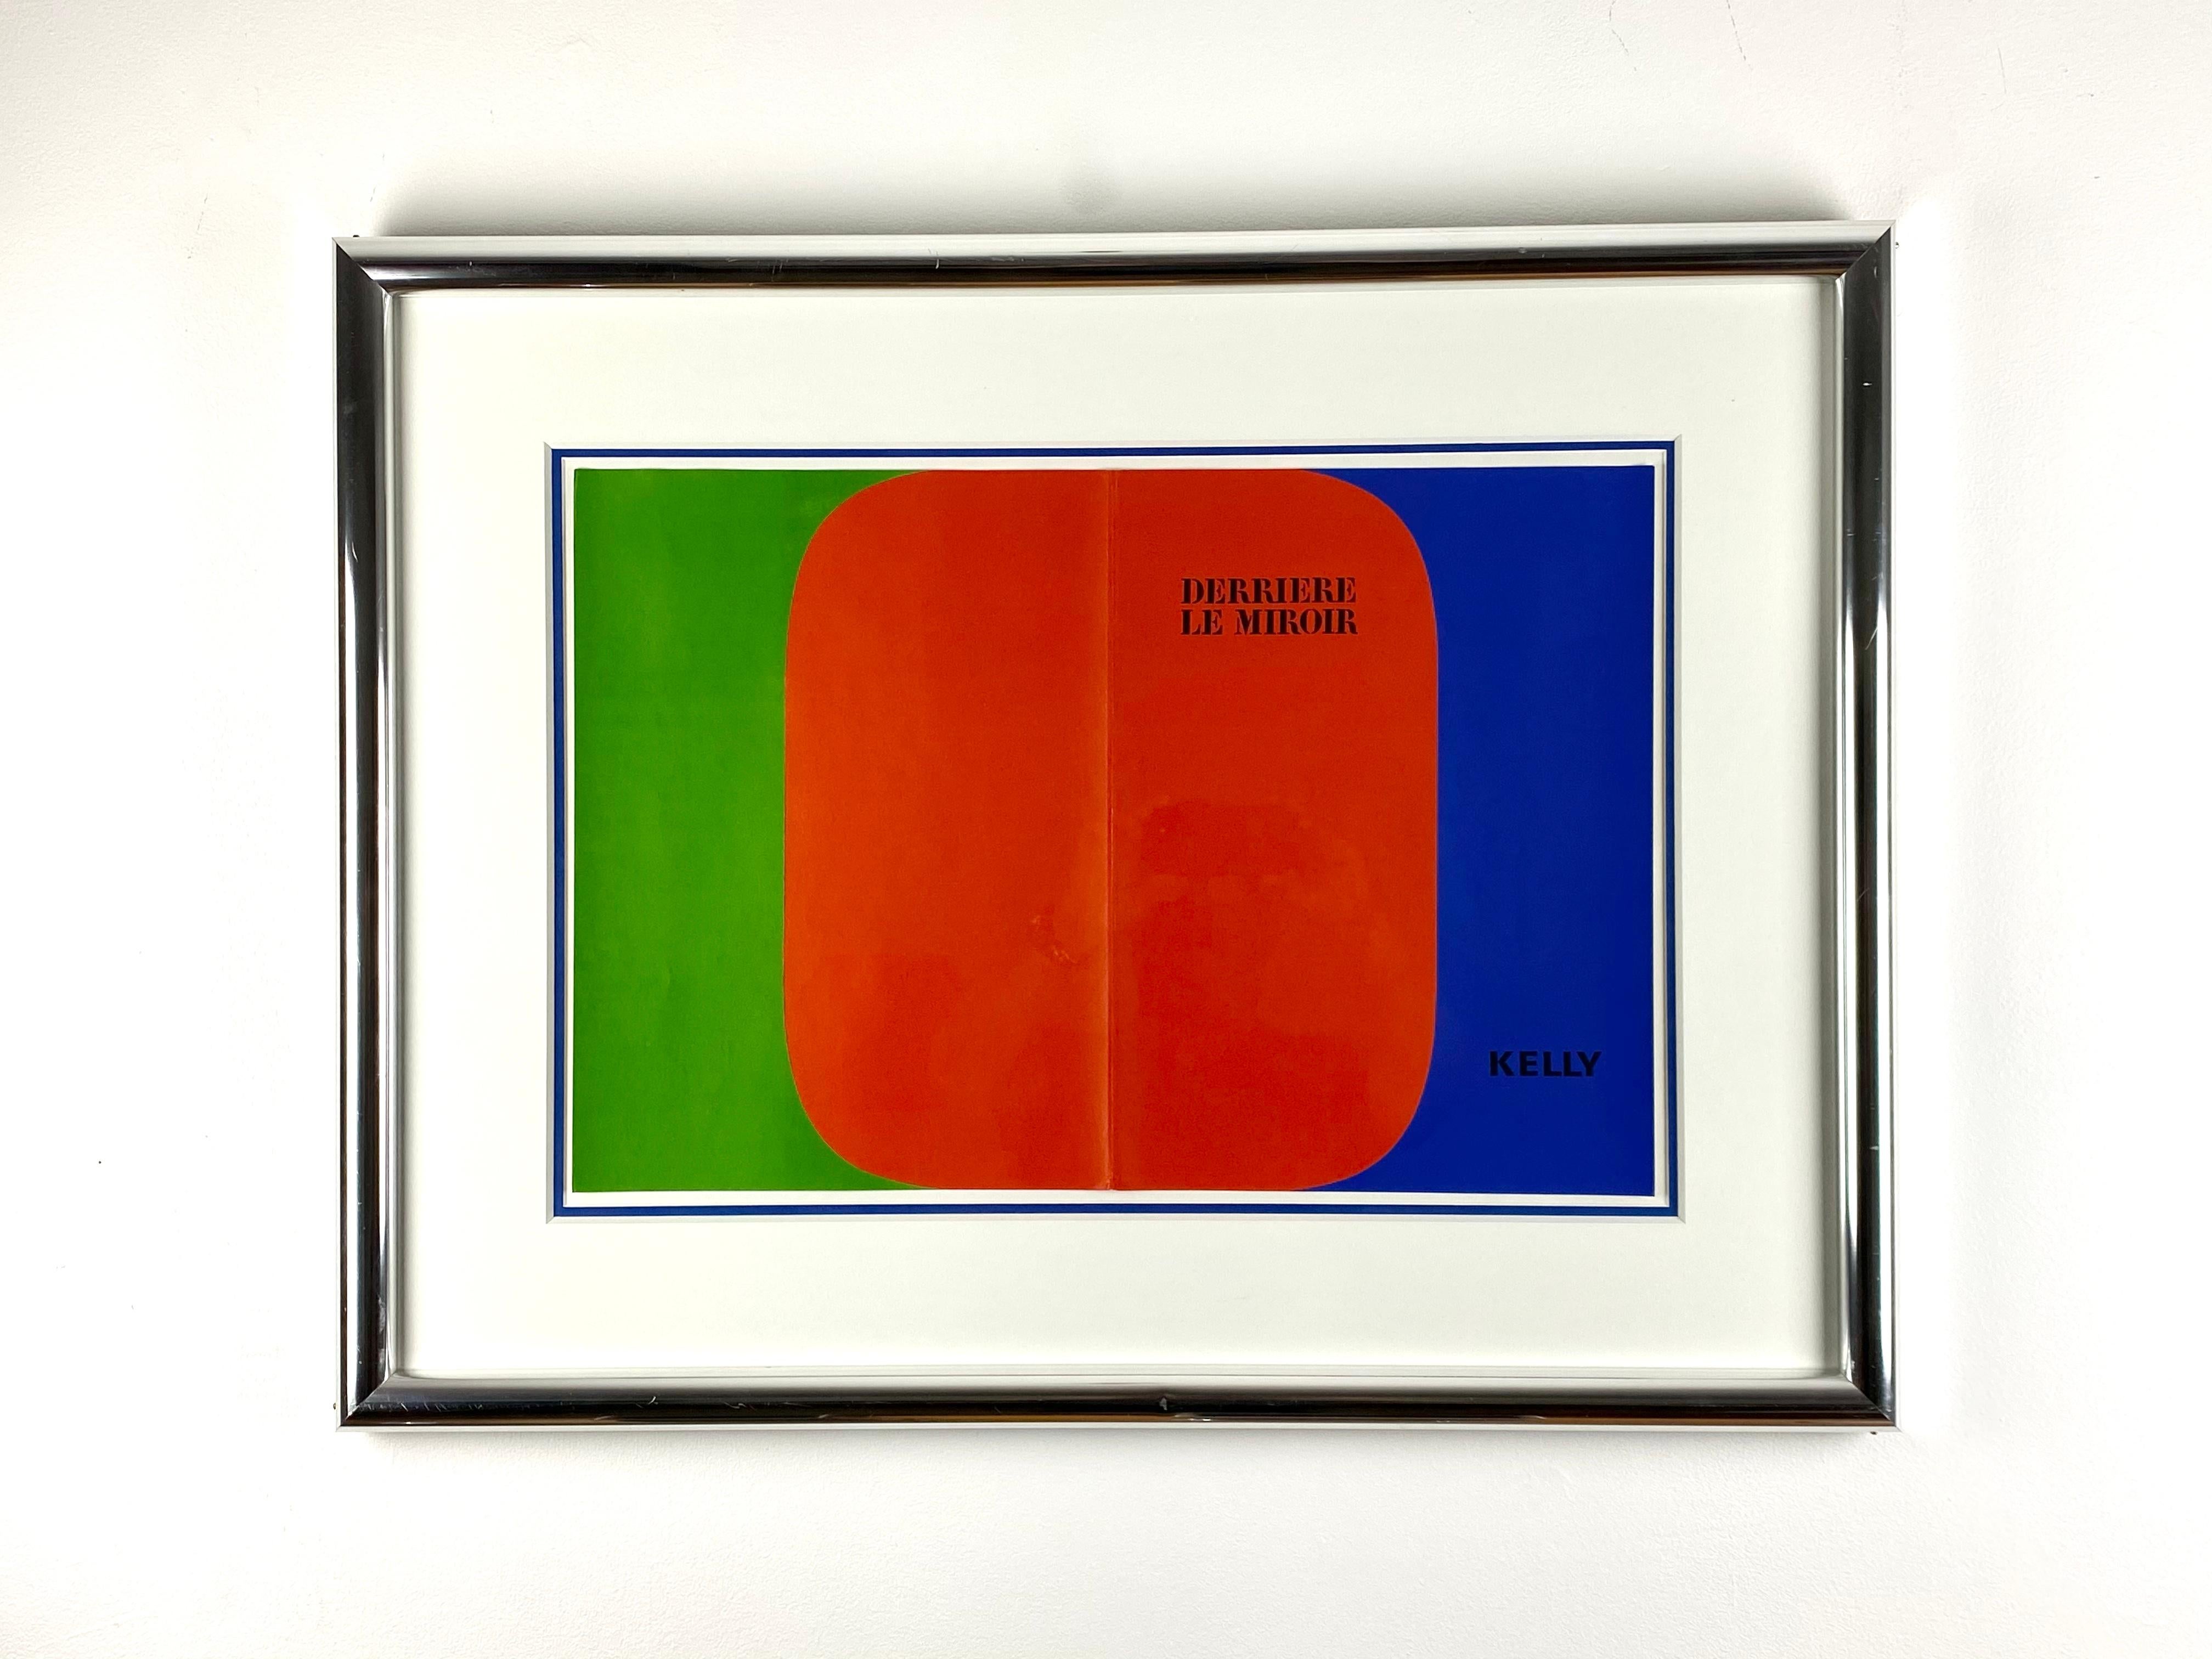 A color lithograph for the cover of Derrière le Miroir, number 149, designed by Ellsworth Kelly (American, 1923 – 2015). This unsigned three-color lithograph in green, red and blue displays the text “Derrière le Miroir” and “Kelly” to the right side